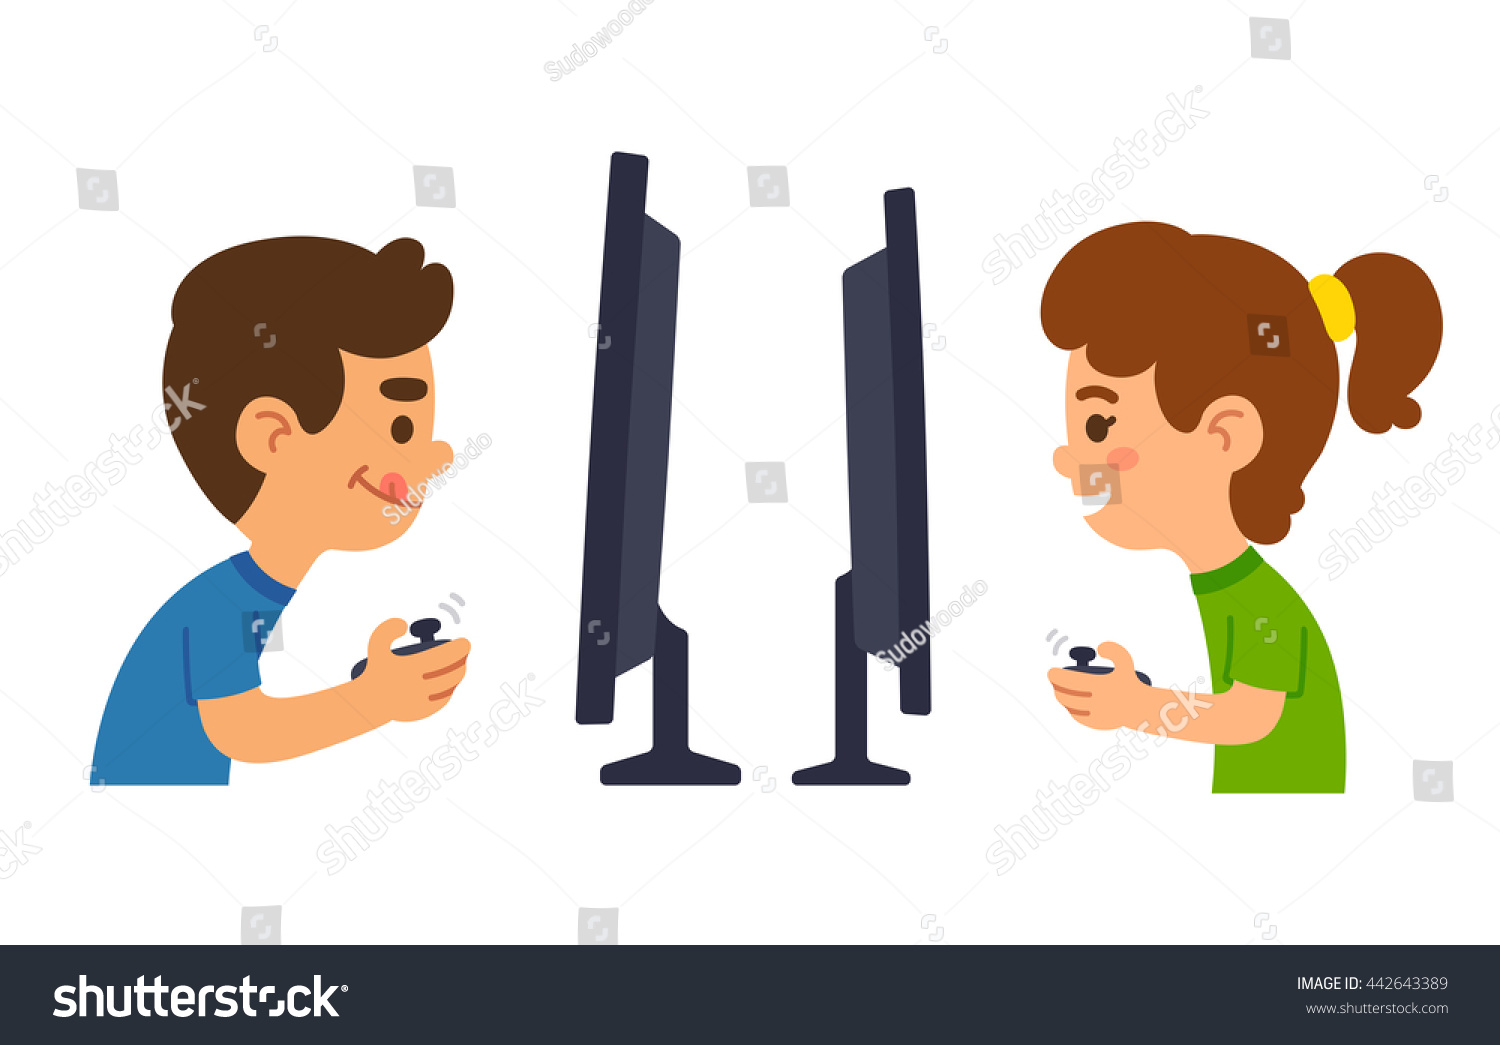 girl playing video games clipart - photo #18